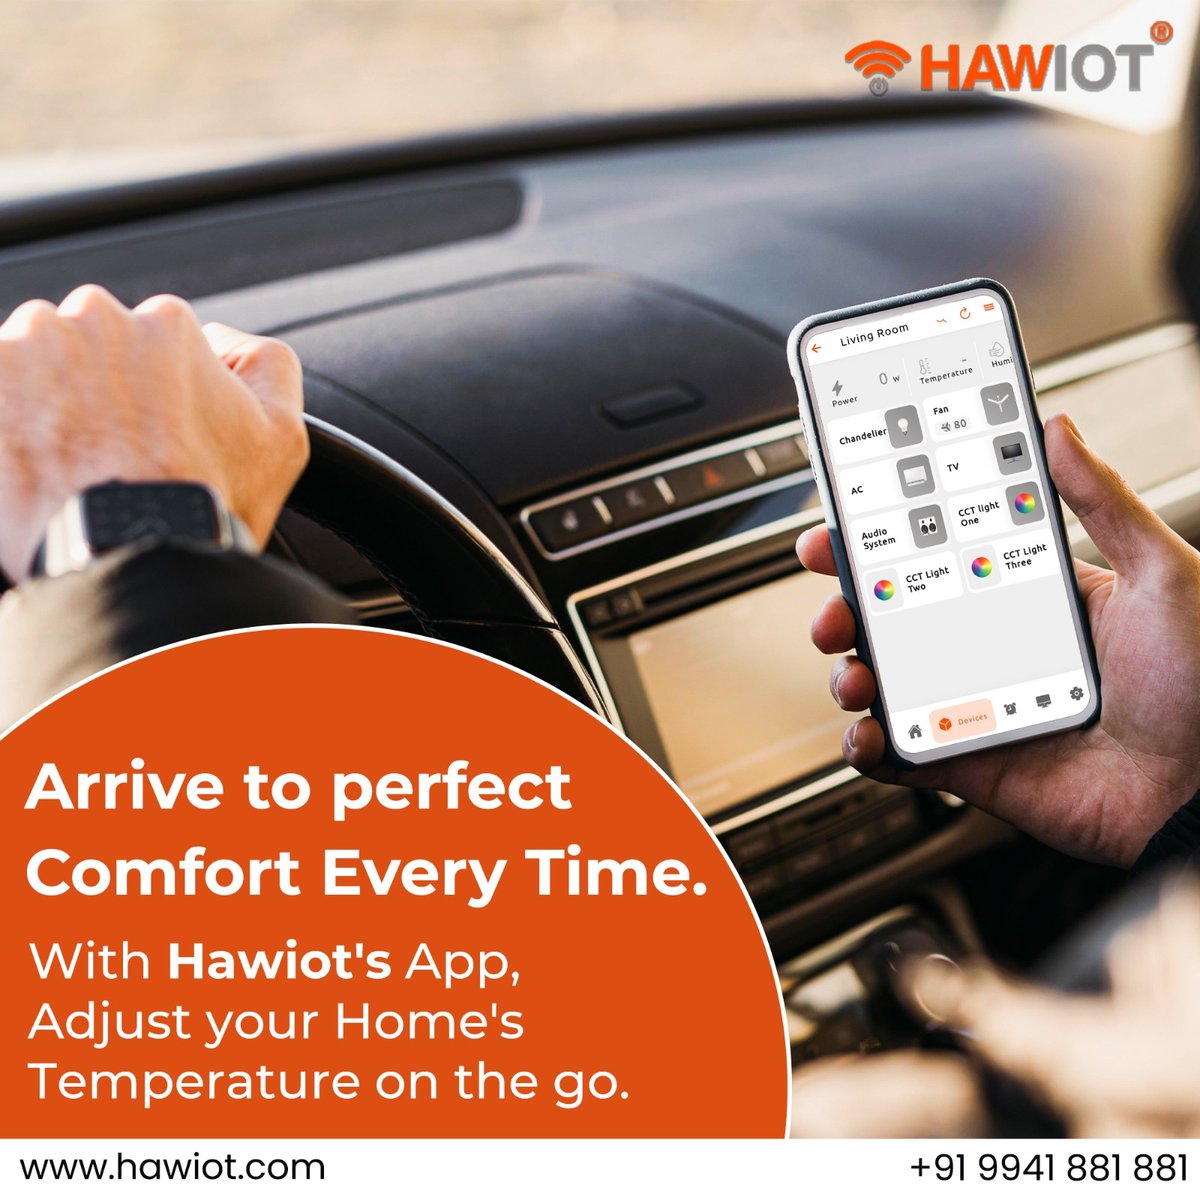 Beat the heat hassle-free with Hawiot. Adjust your home's temperature from anywhere, anytime

#Hawiot #hawiotprivatelimited #smarthome #homeautomation #smarthomes #indianhomes #EffortlessLiving #SmartLiving #hyderabad #securehome #smartsecurity #roomtemperature #smartapp #sm4dm